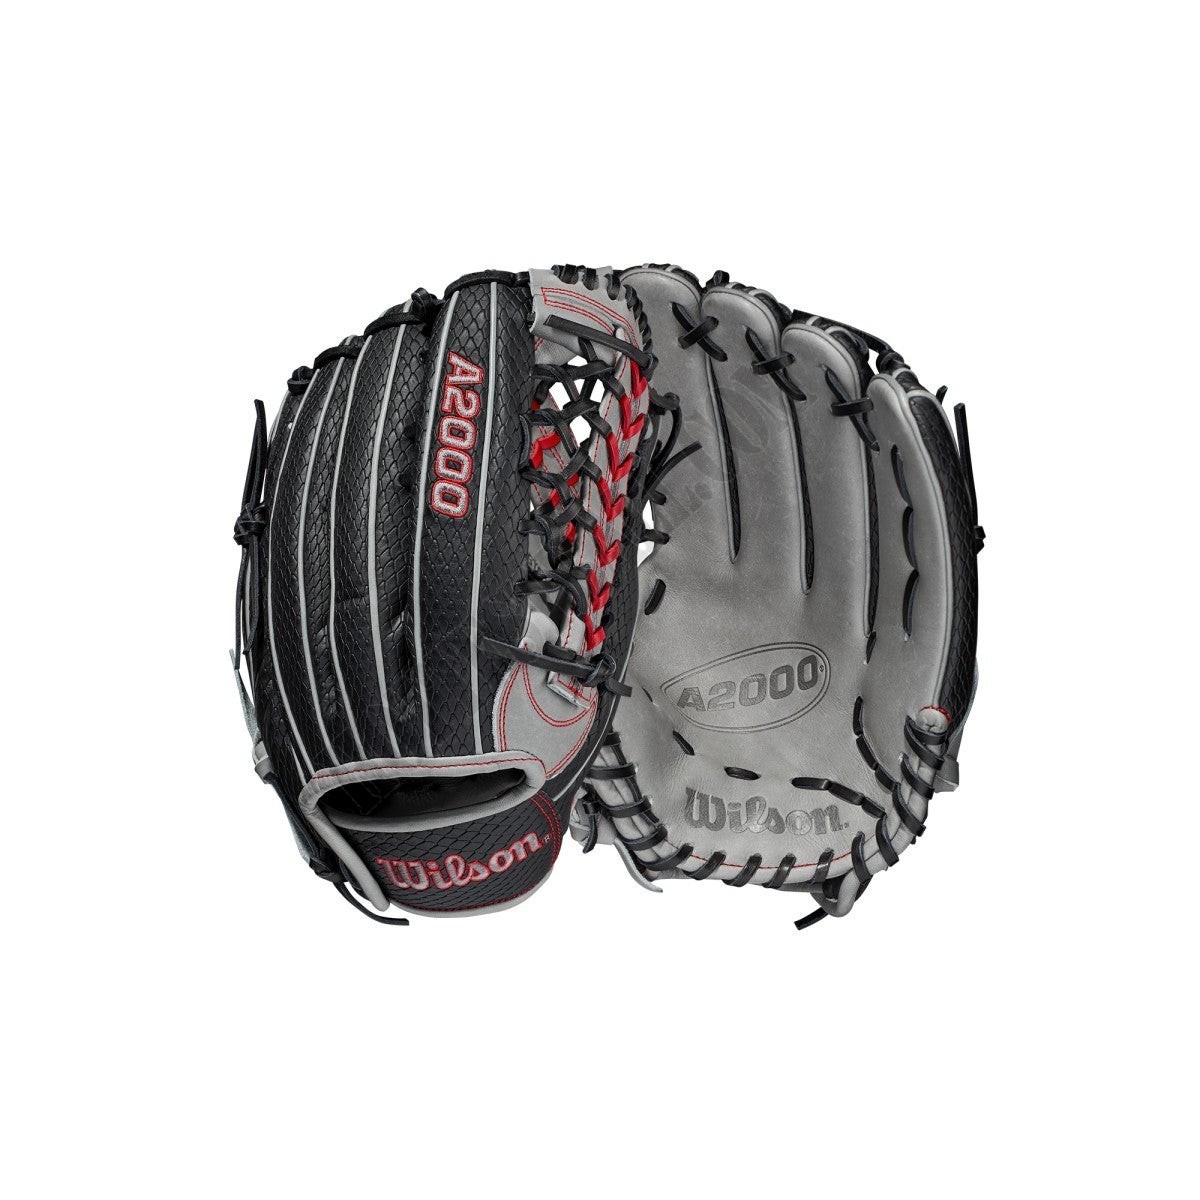 2021 A2000 PF92SS 12.25" Pedroia Fit Outfield Baseball Glove ● Wilson Promotions - 2021 A2000 PF92SS 12.25" Pedroia Fit Outfield Baseball Glove ● Wilson Promotions